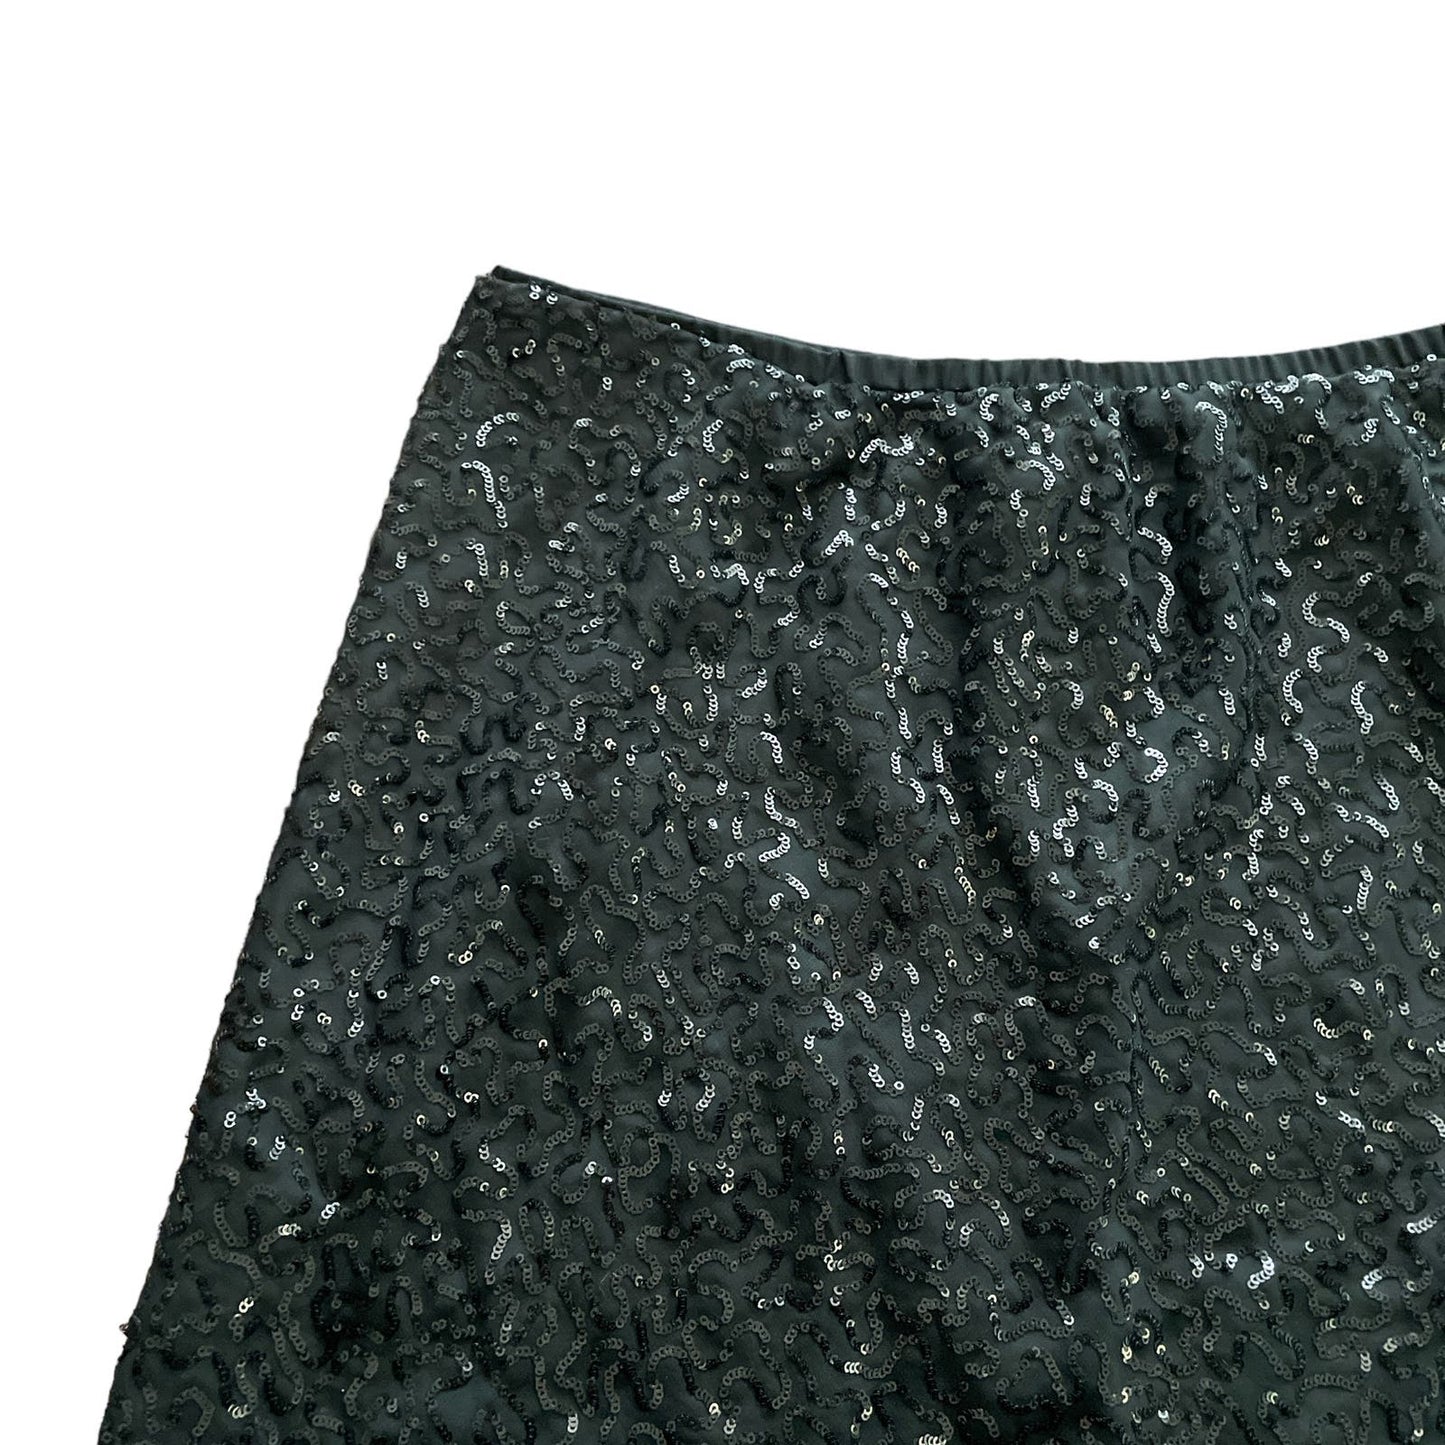 90s Black Sequined Party Skirt 8